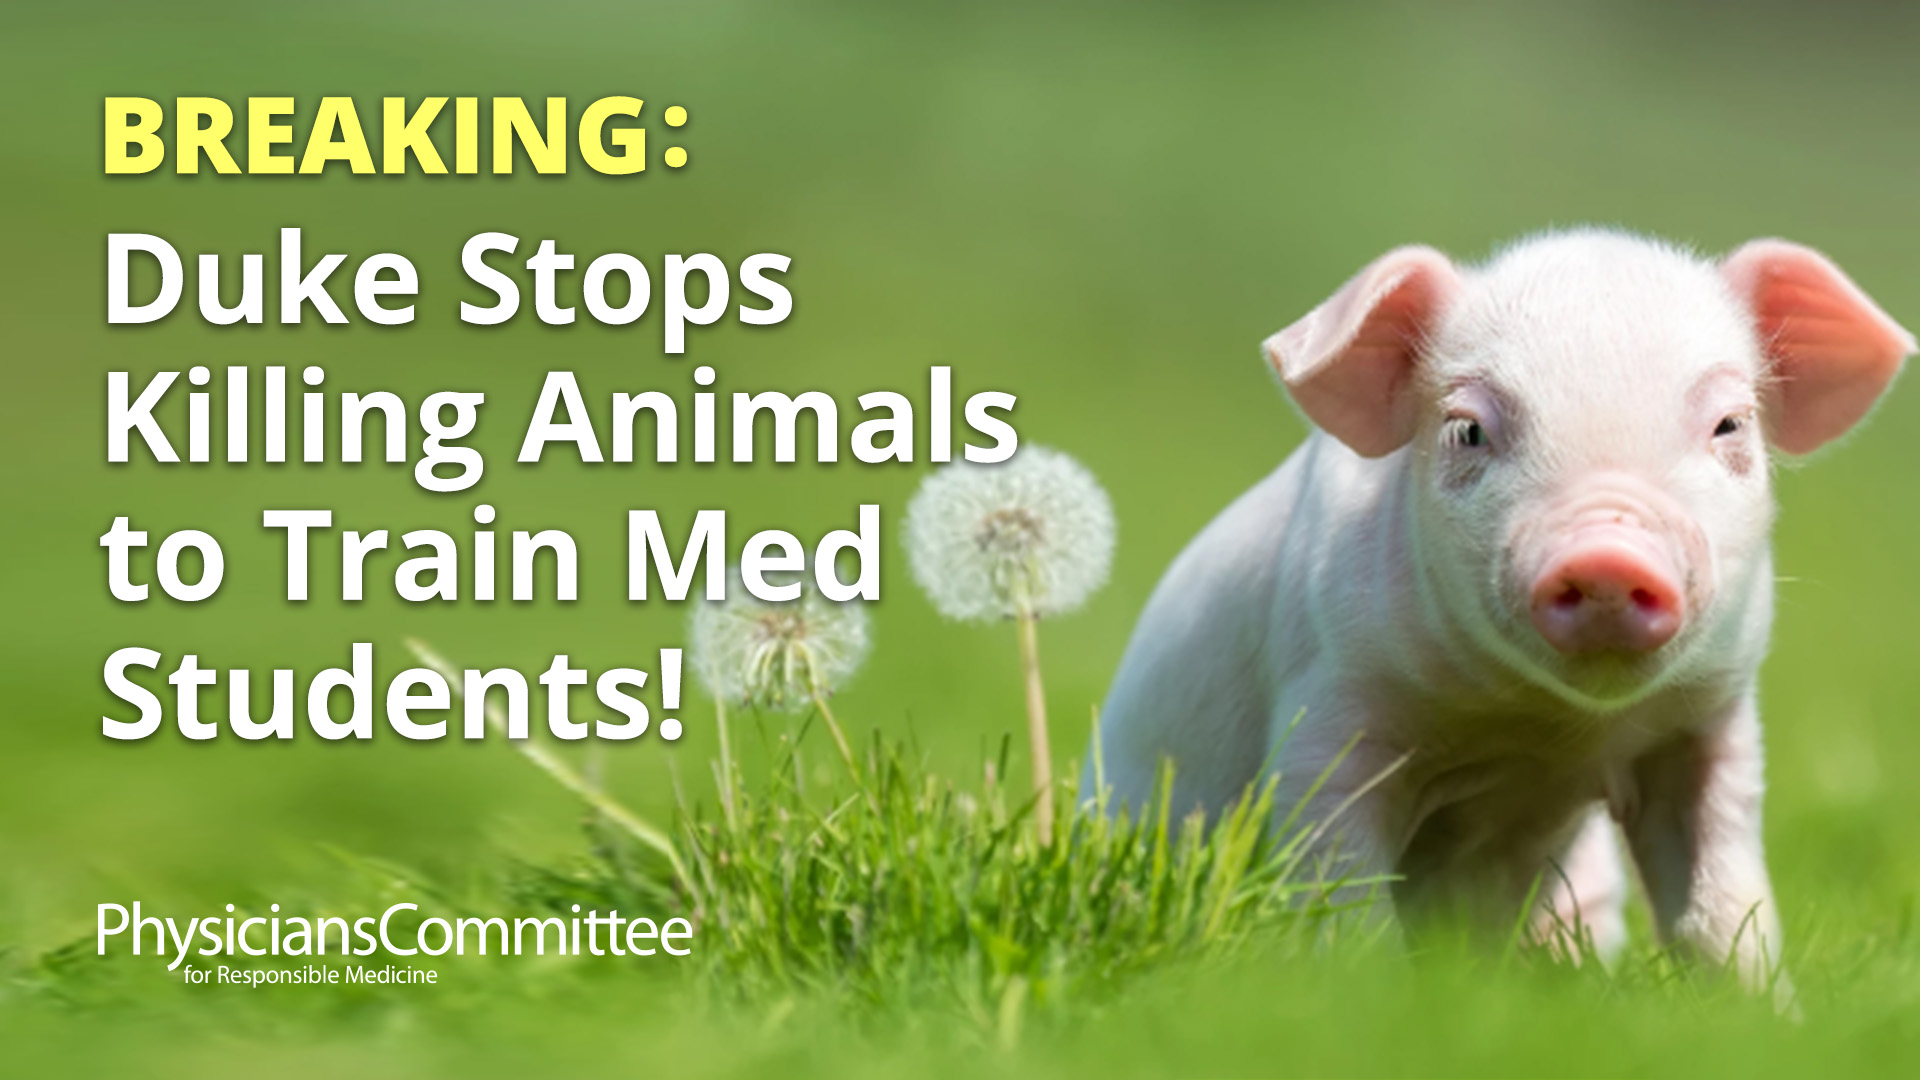  The Physicians Committee Congratulates Duke University on Replacing Animals in Medical Student Curriculum